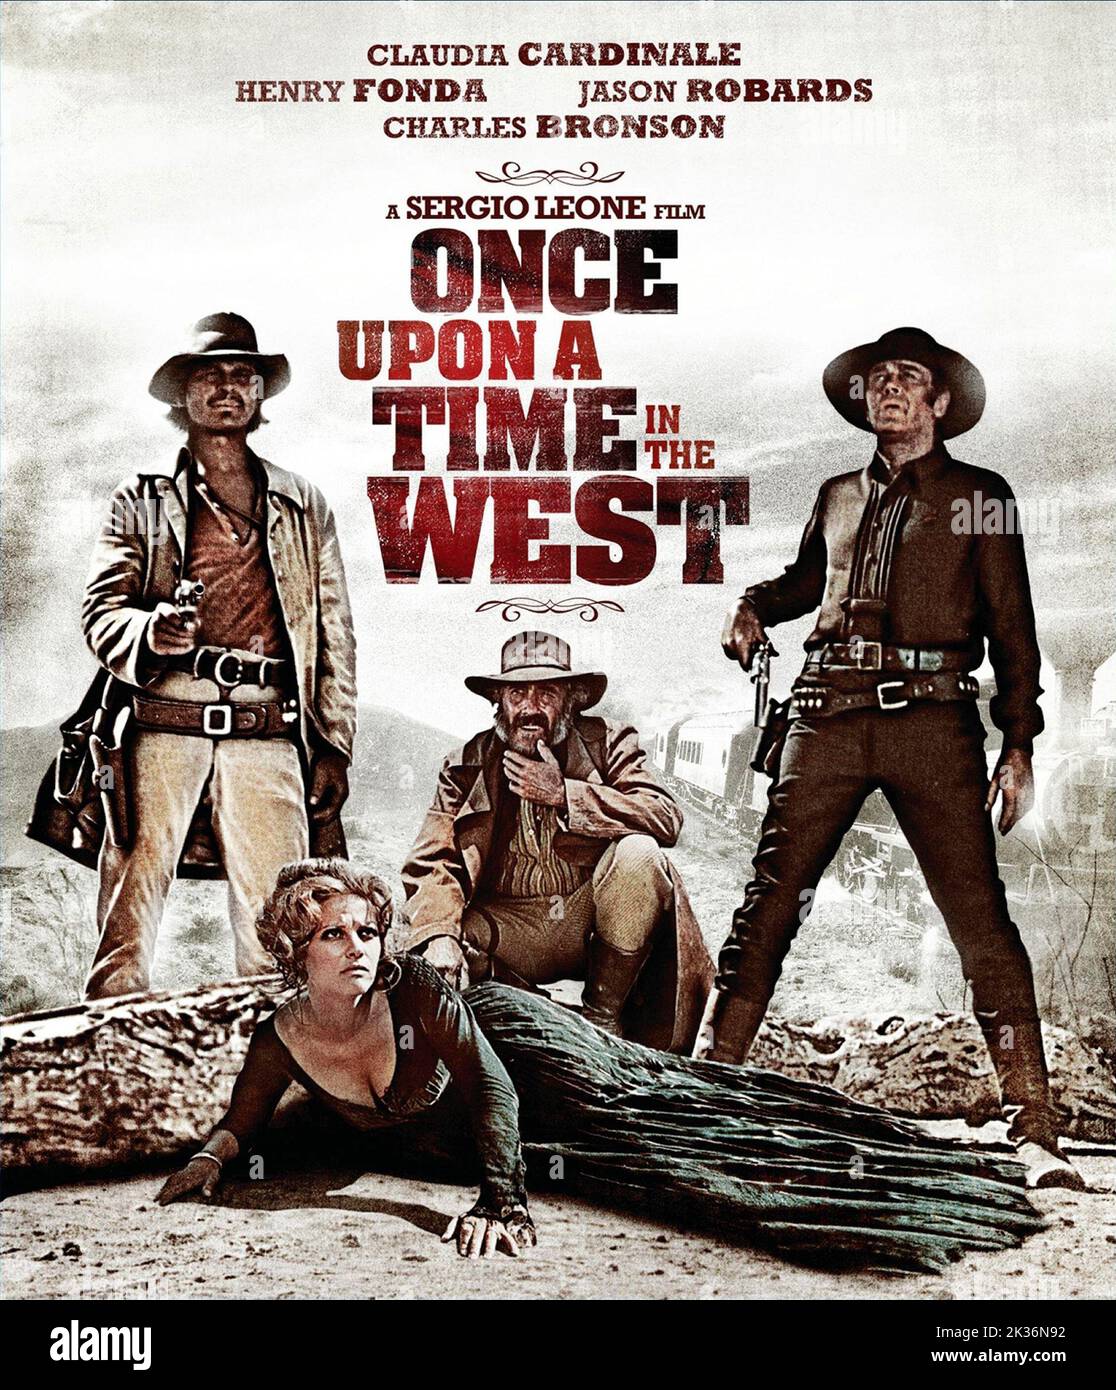 Once Upon A Time In The West 1968. Once Upon A Time In The West Movie Poster Stock Photo